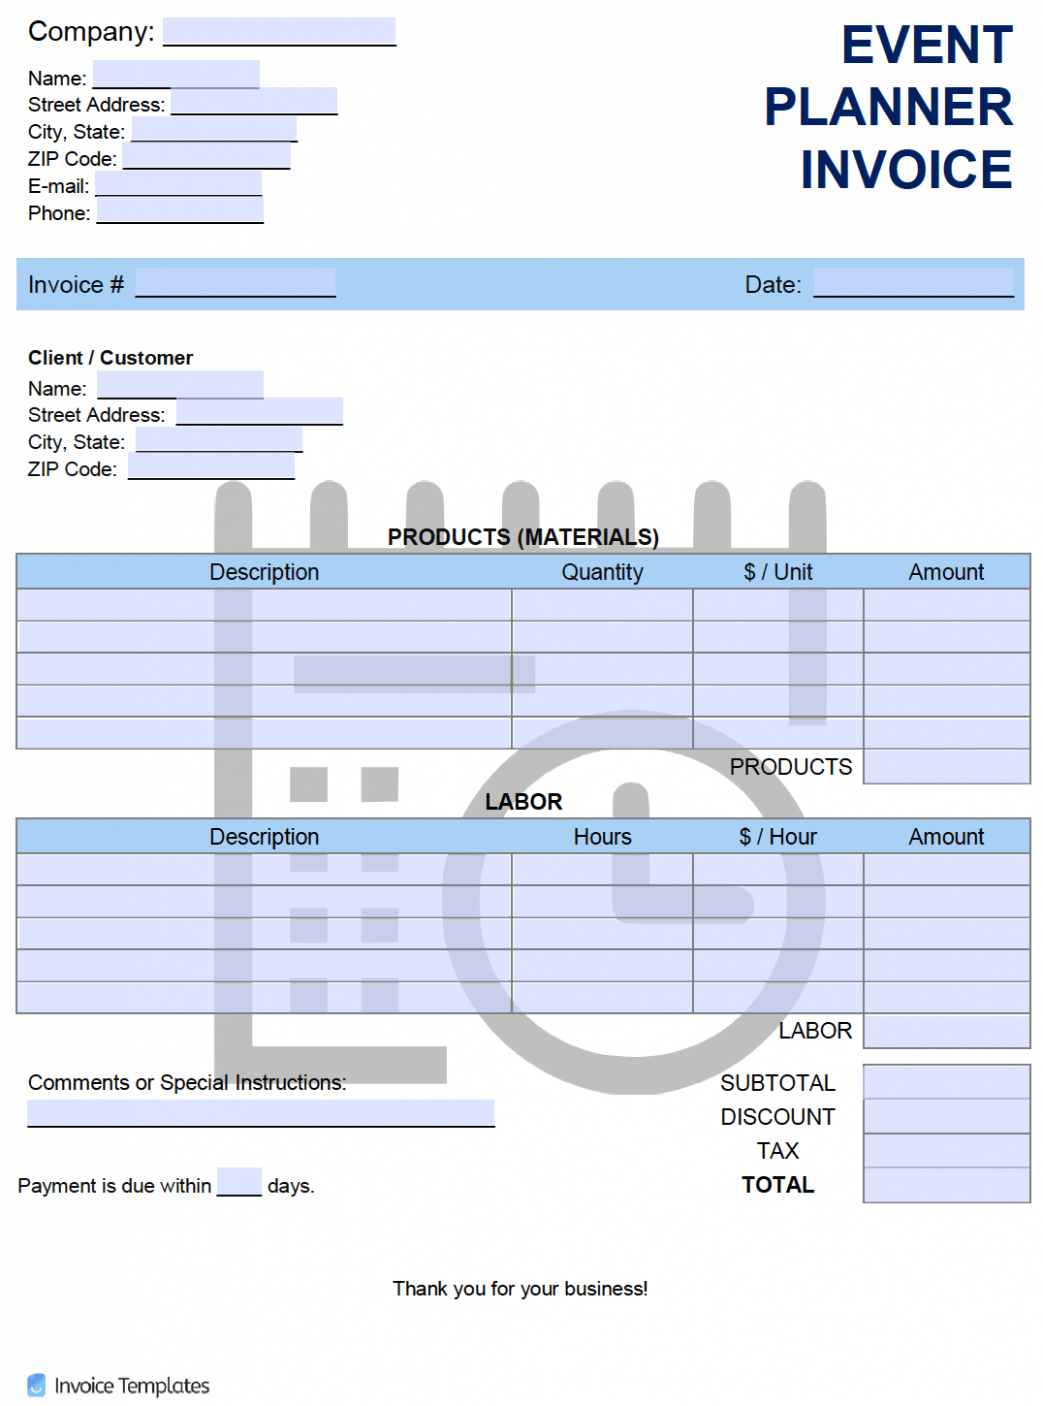 Sample Event Planner Invoice Template Word